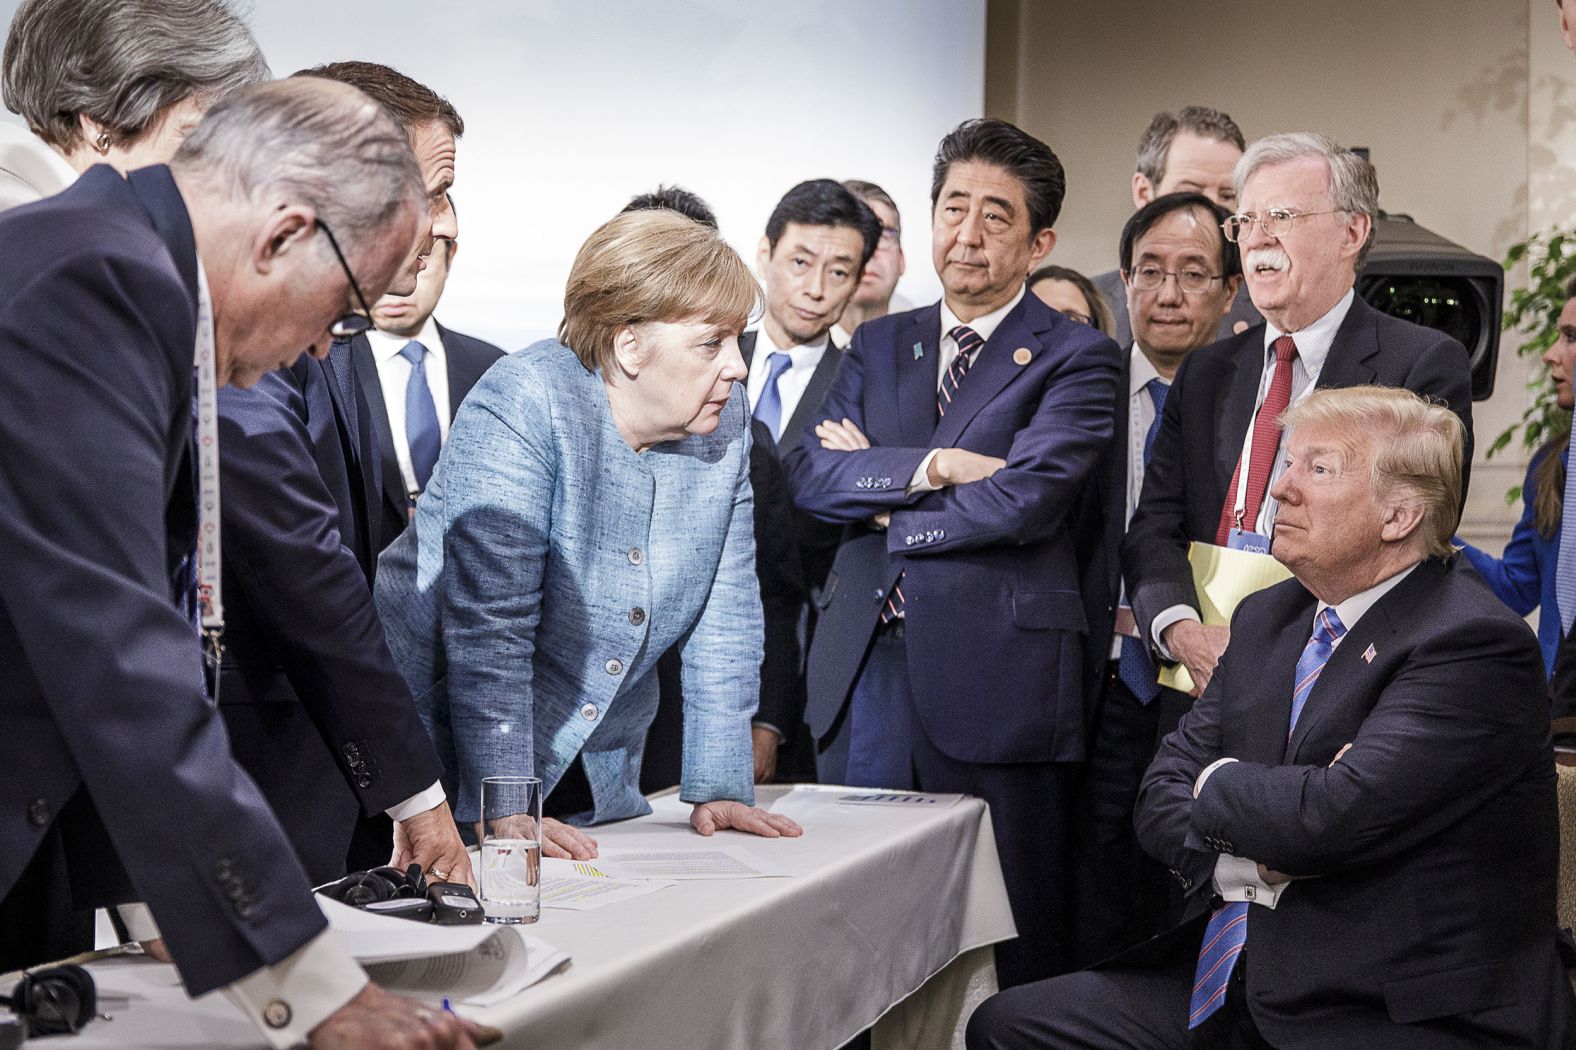 In this photo provided by the German Government Press Office, Merkel talks with Trump as they are surrounded by other leaders at the G7 summit in June 2018. According to two senior diplomatic sources, <a href="https://www.cnn.com/2018/06/11/politics/g7-photo/index.html" target="_blank">the photo was taken</a> when there was a difficult conversation taking place regarding the G7's communique and several issues the United States had leading up to it.